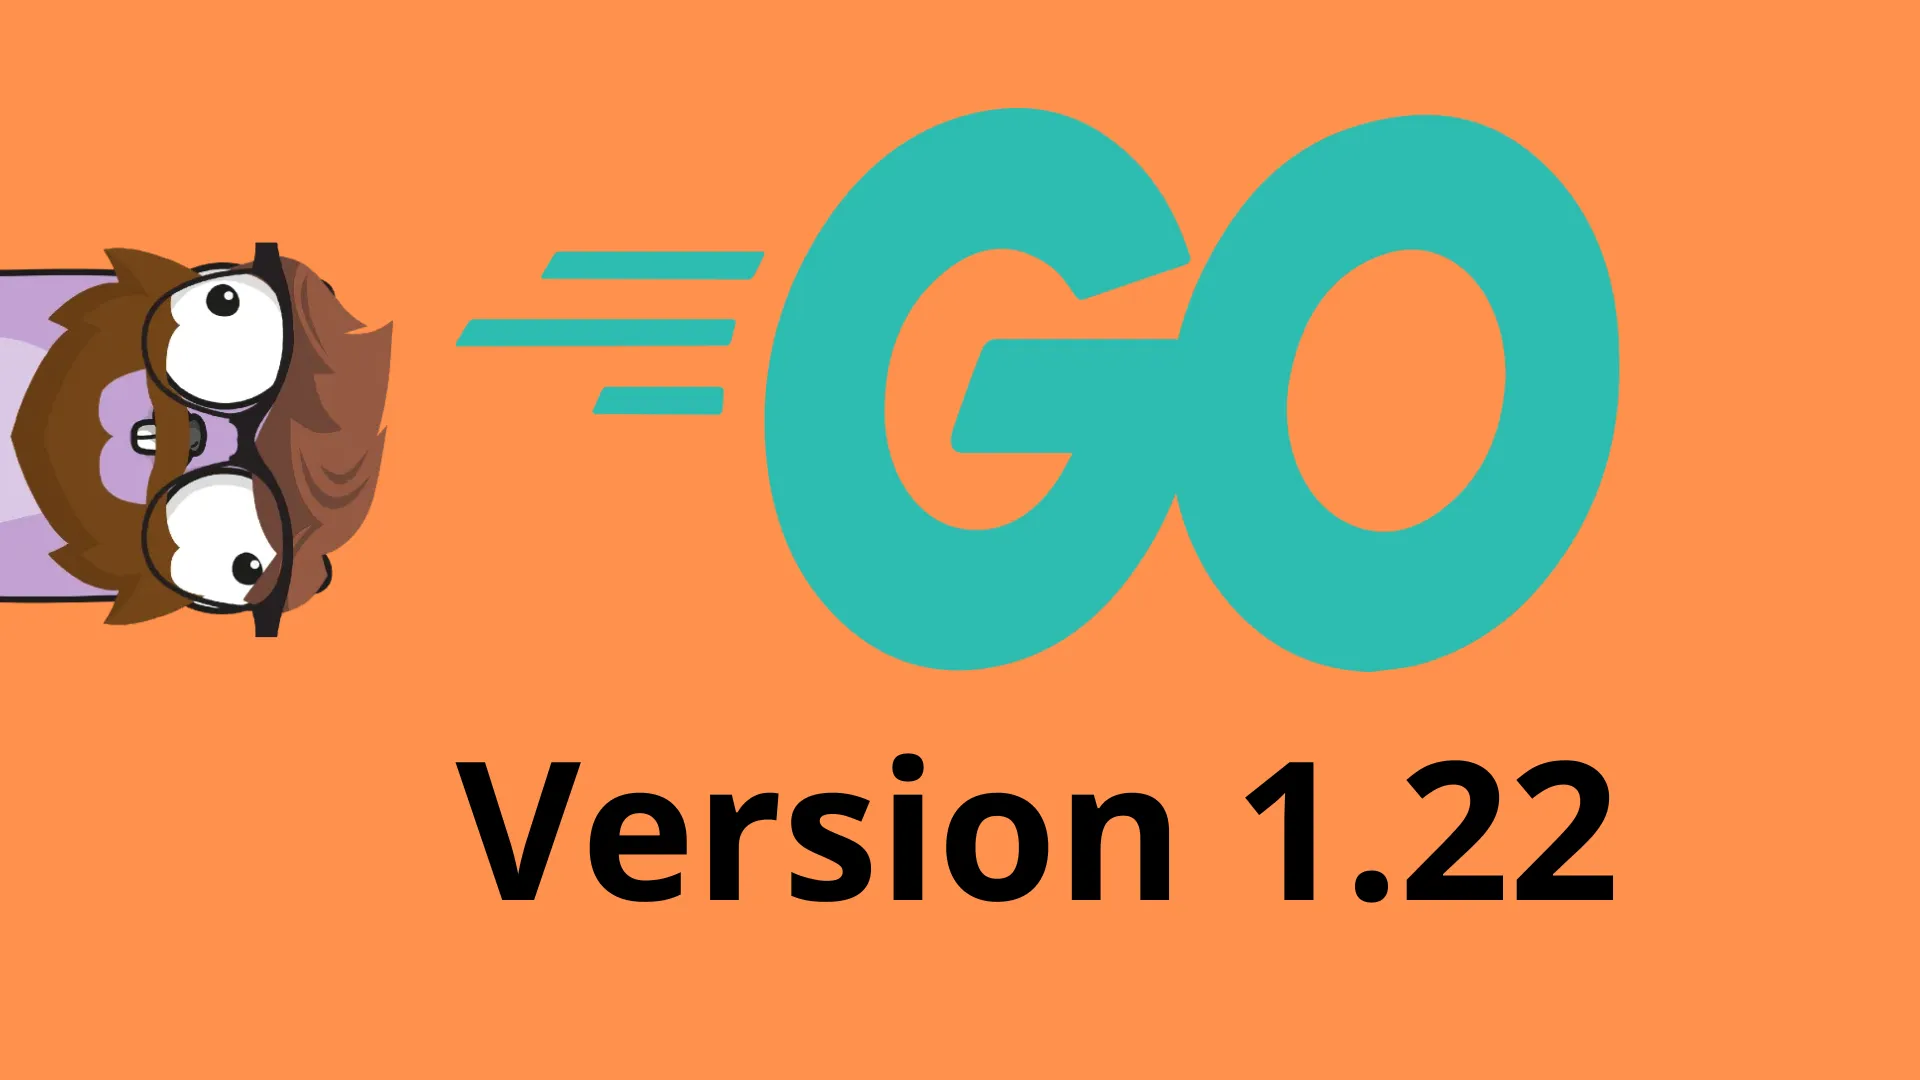 Go version 1.22 is out and it has some amazing changes. In this article, we take a look at them!